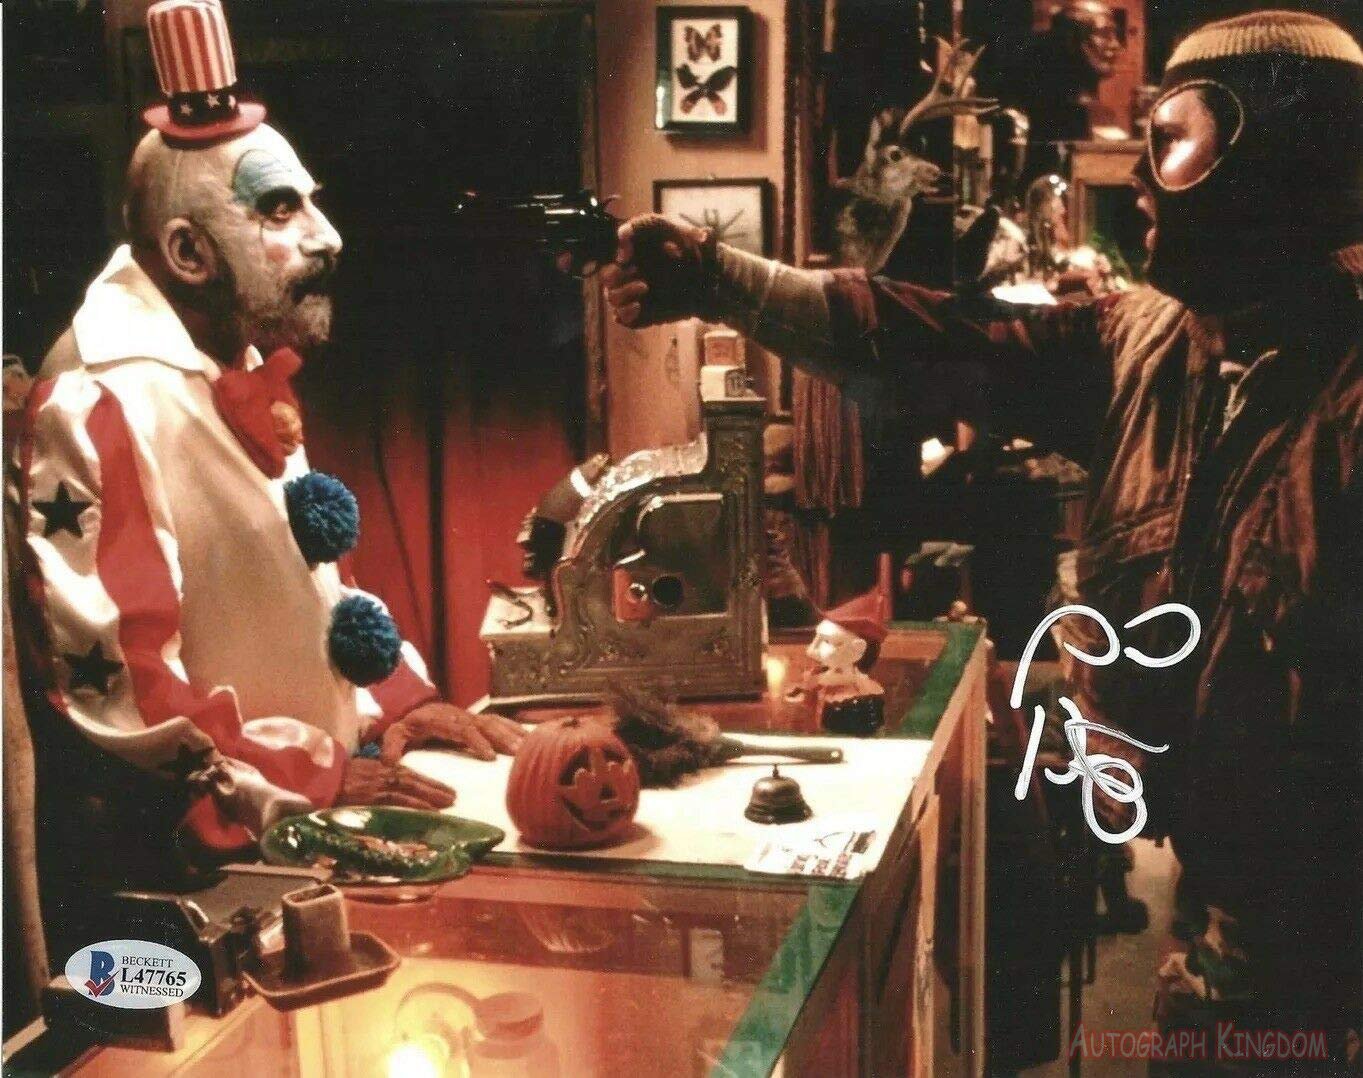 Sid Haig Captain Spaulding Signed & Mounted 8 x 10" Autographed Photo (Reprint:1496)